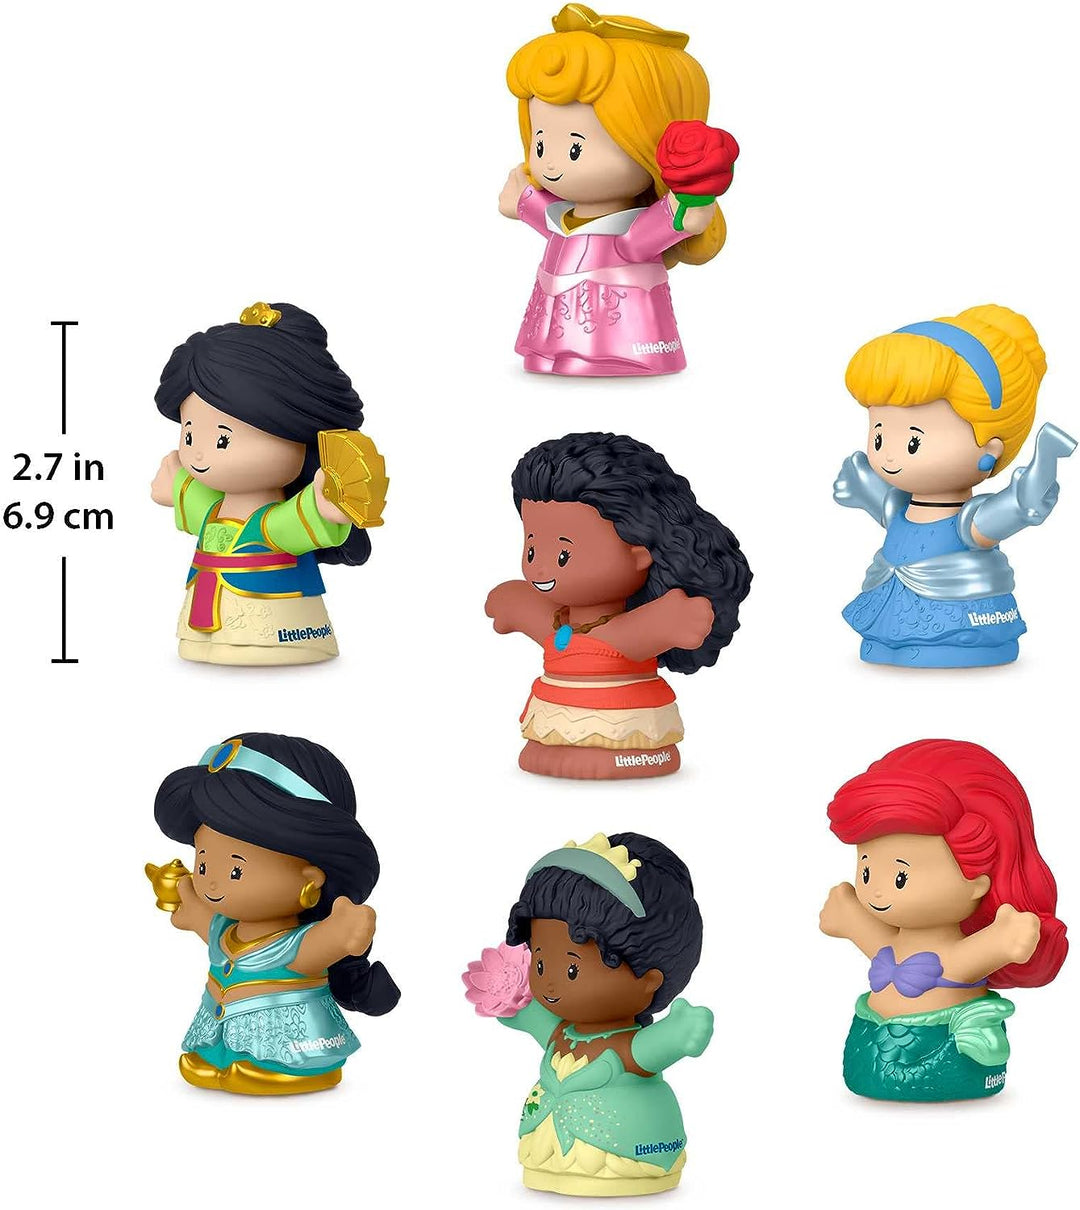 ?Fisher-Price Little People Disney Princess Toys, Set of 7 Character Figures for Toddler and Preschool Pretend Play